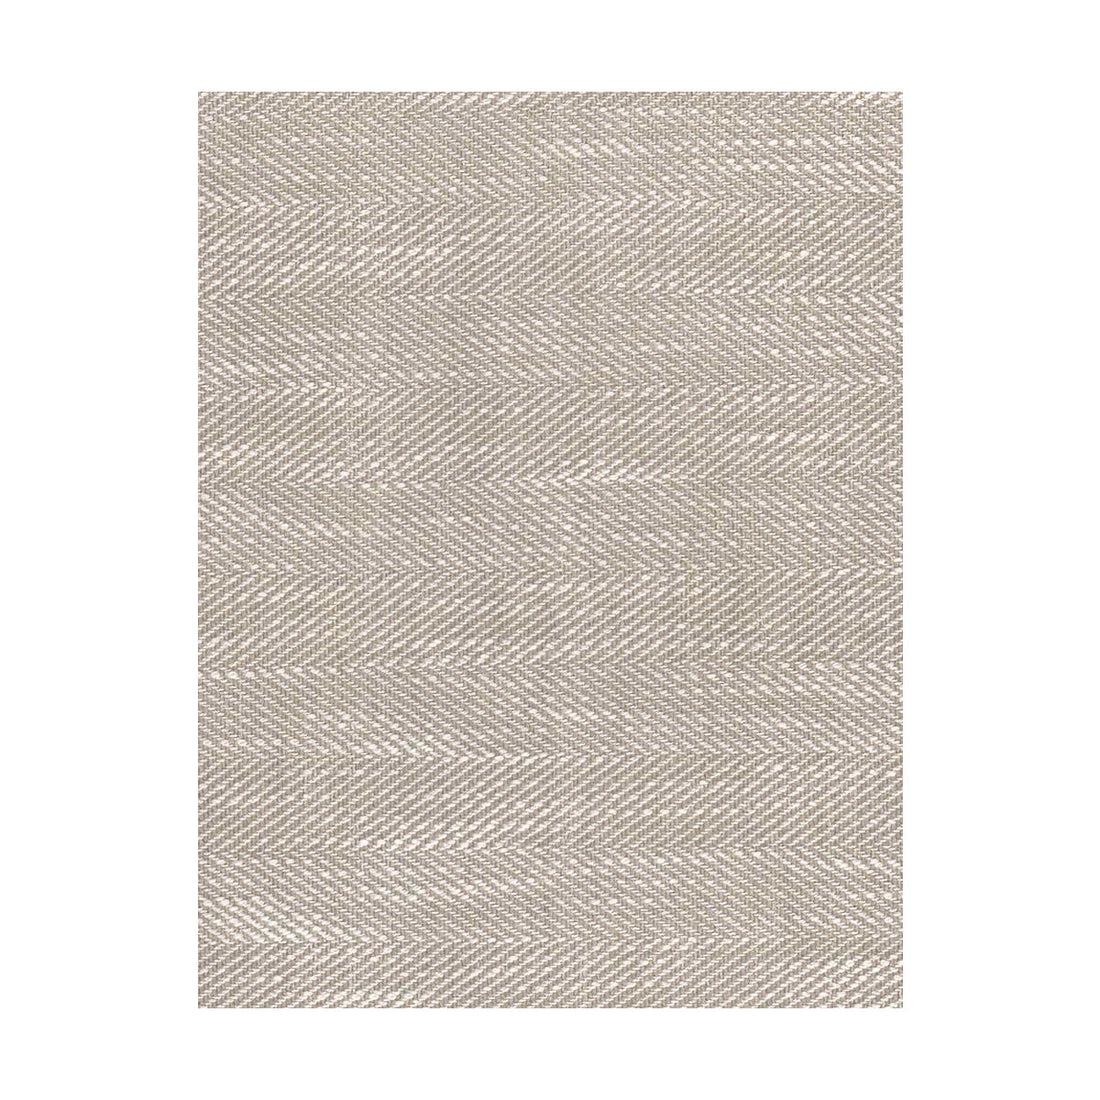 Summit fabric in ivory color - pattern AM100147.1.0 - by Kravet Couture in the Andrew Martin Portofino collection